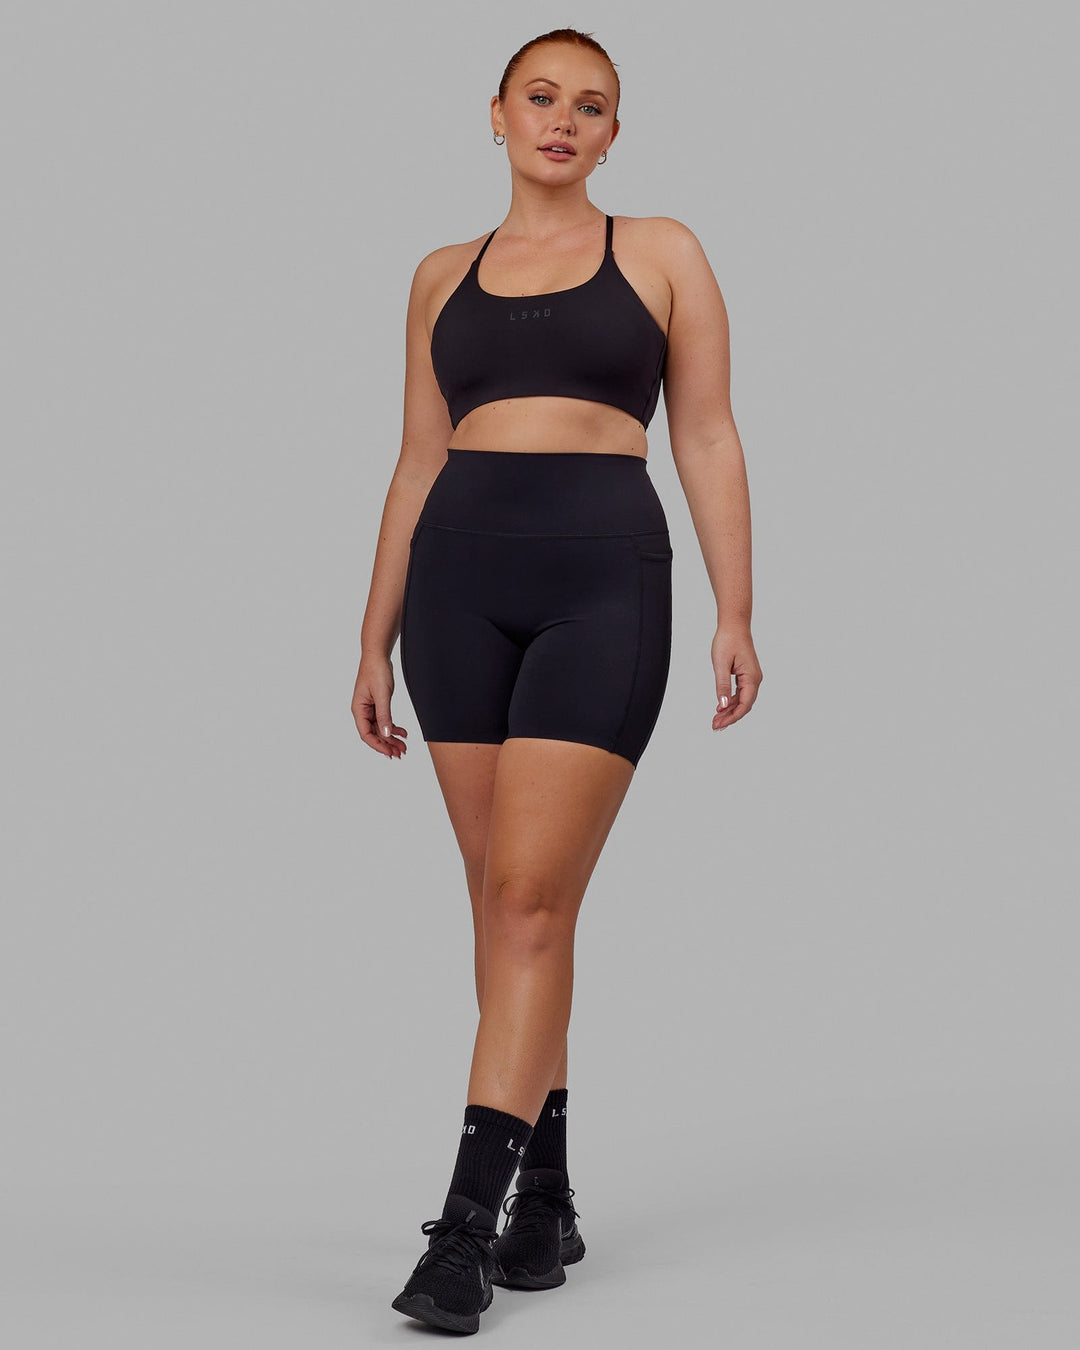 Woman wearing Elixir Mid Short Tight with Pockets - Black